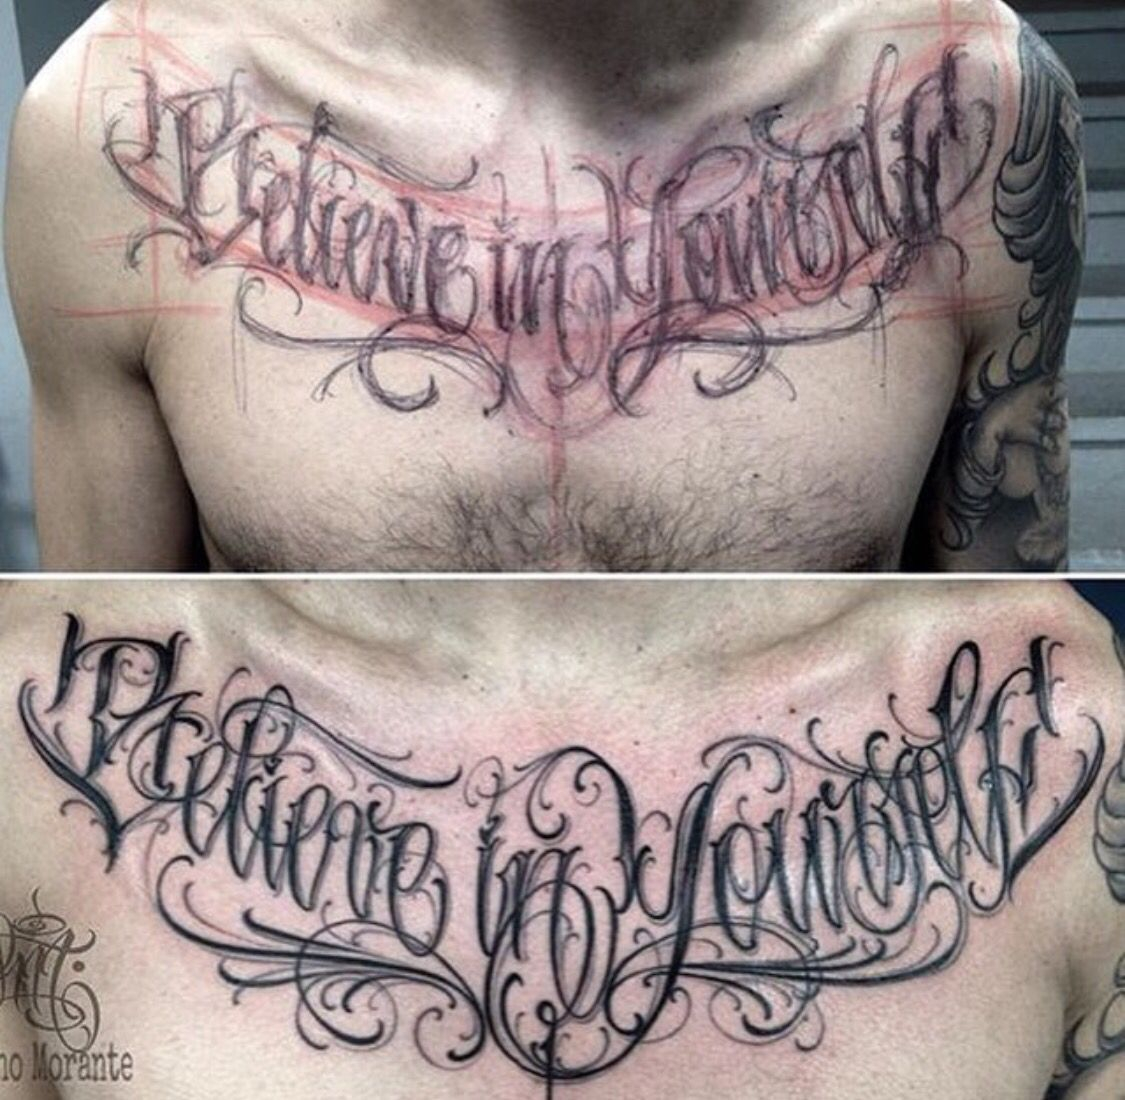 Believe In Yourself Chest Lettering Tattoo Tattoo Envy Tatuagem intended for sizing 1125 X 1100